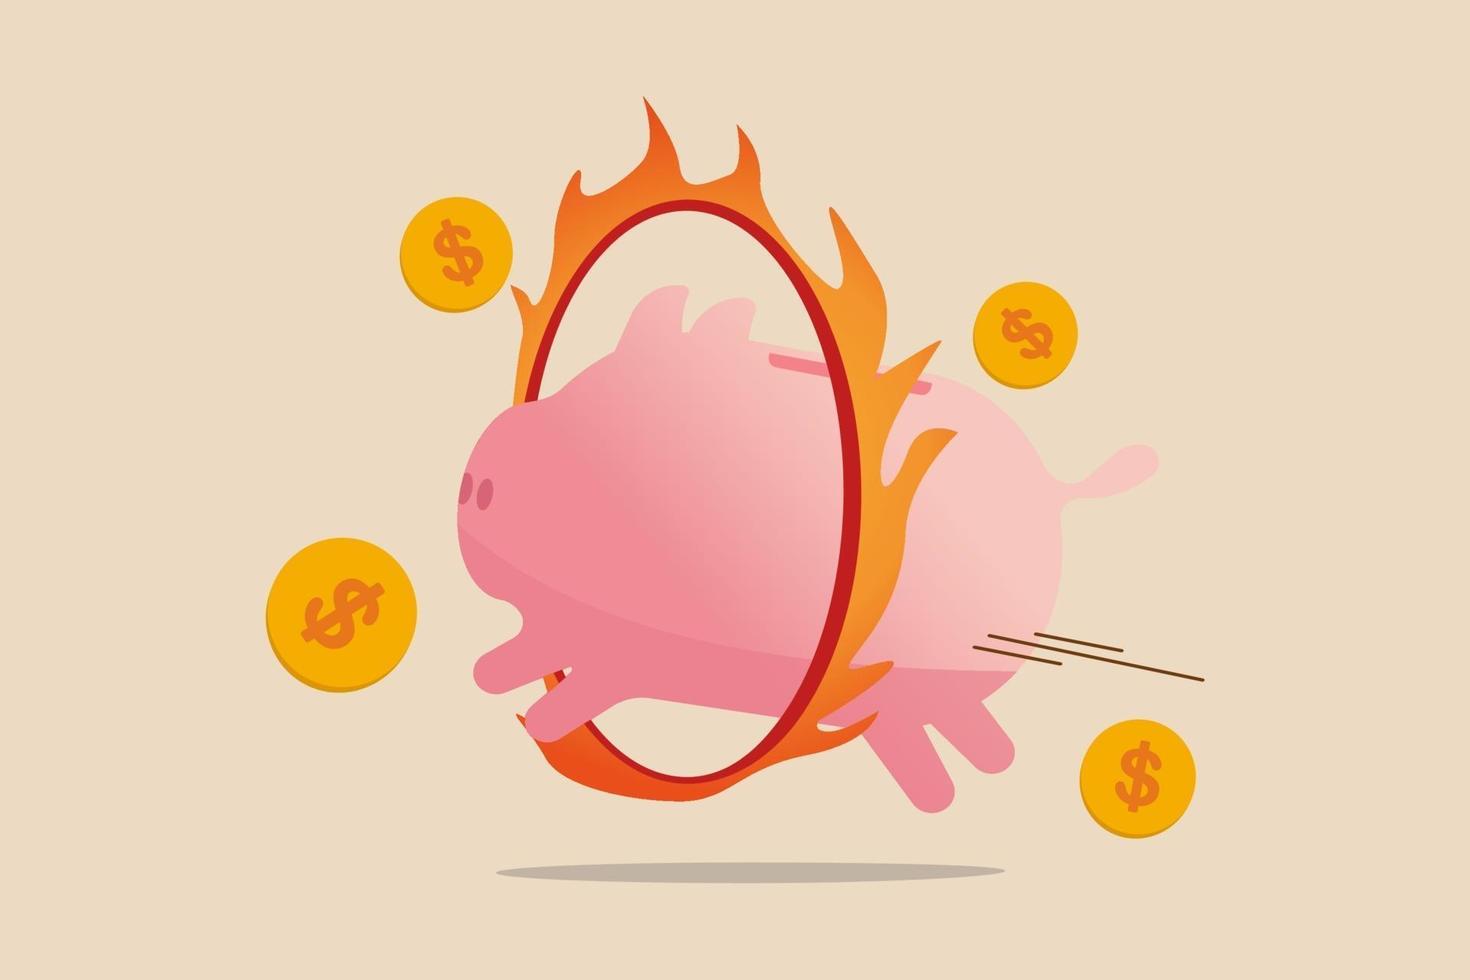 Financial risk, investment volatility or savings for wealthy retirement concept, bravely pink piggy bank jump through danger ring of fire metaphor of survive in financial crisis or economic recession. vector